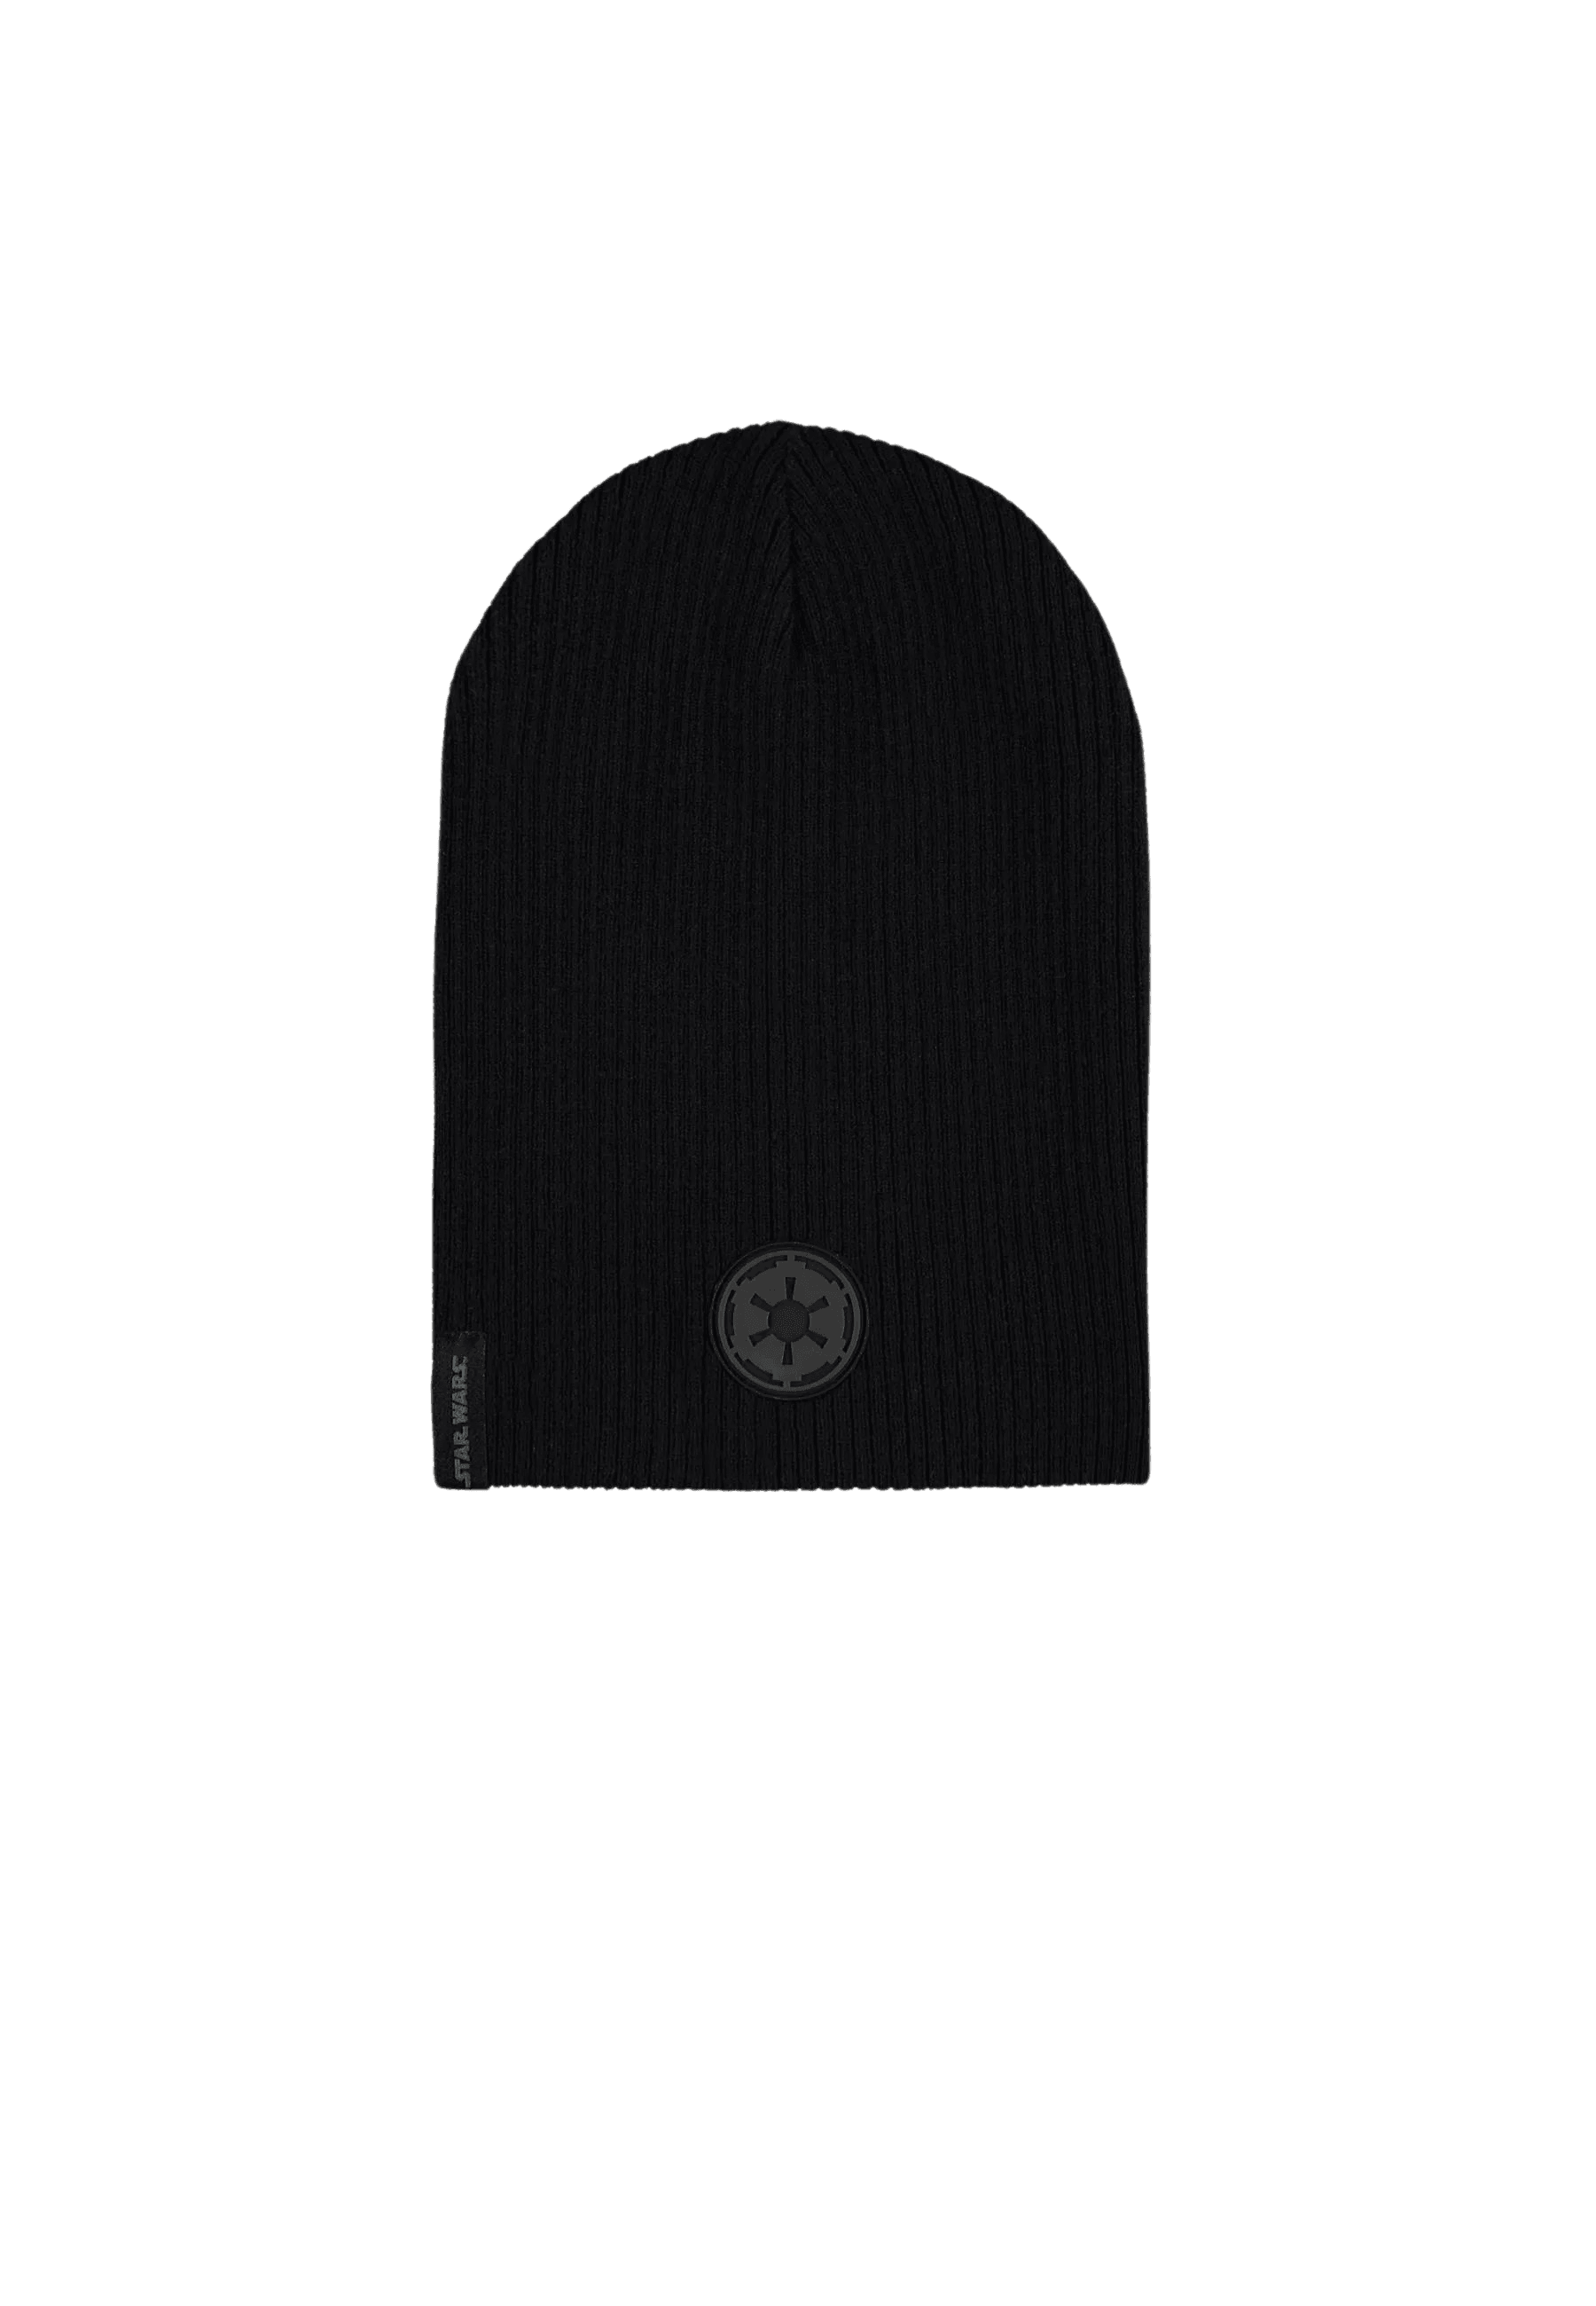 Difuzed - Star Wars - Mens Reversible Slouchy Beanie - The Card Vault